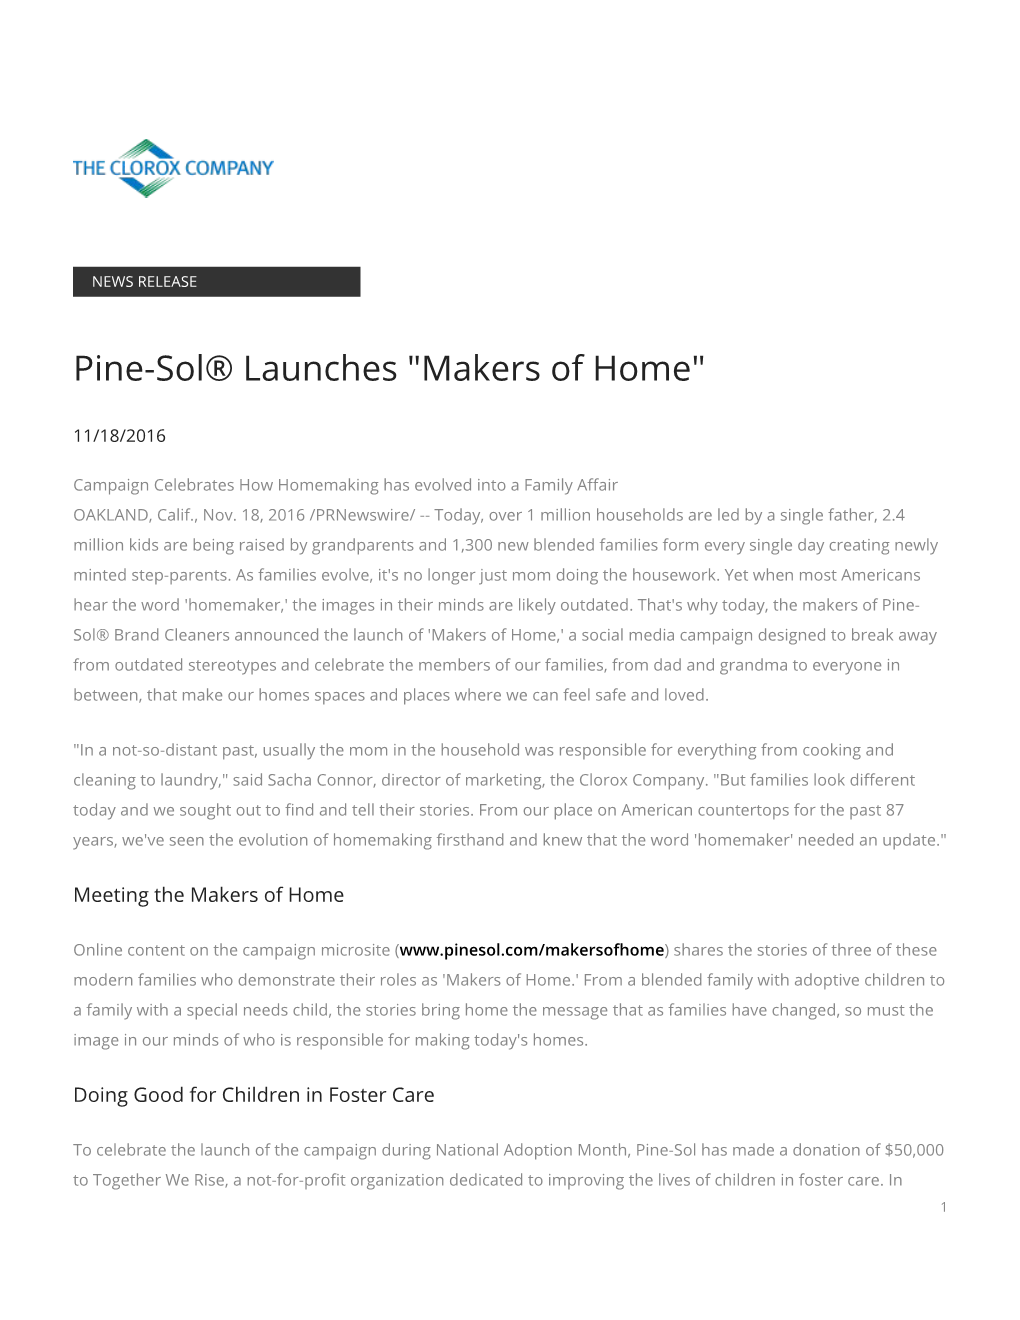 Pine-Sol® Launches "Makers of Home"